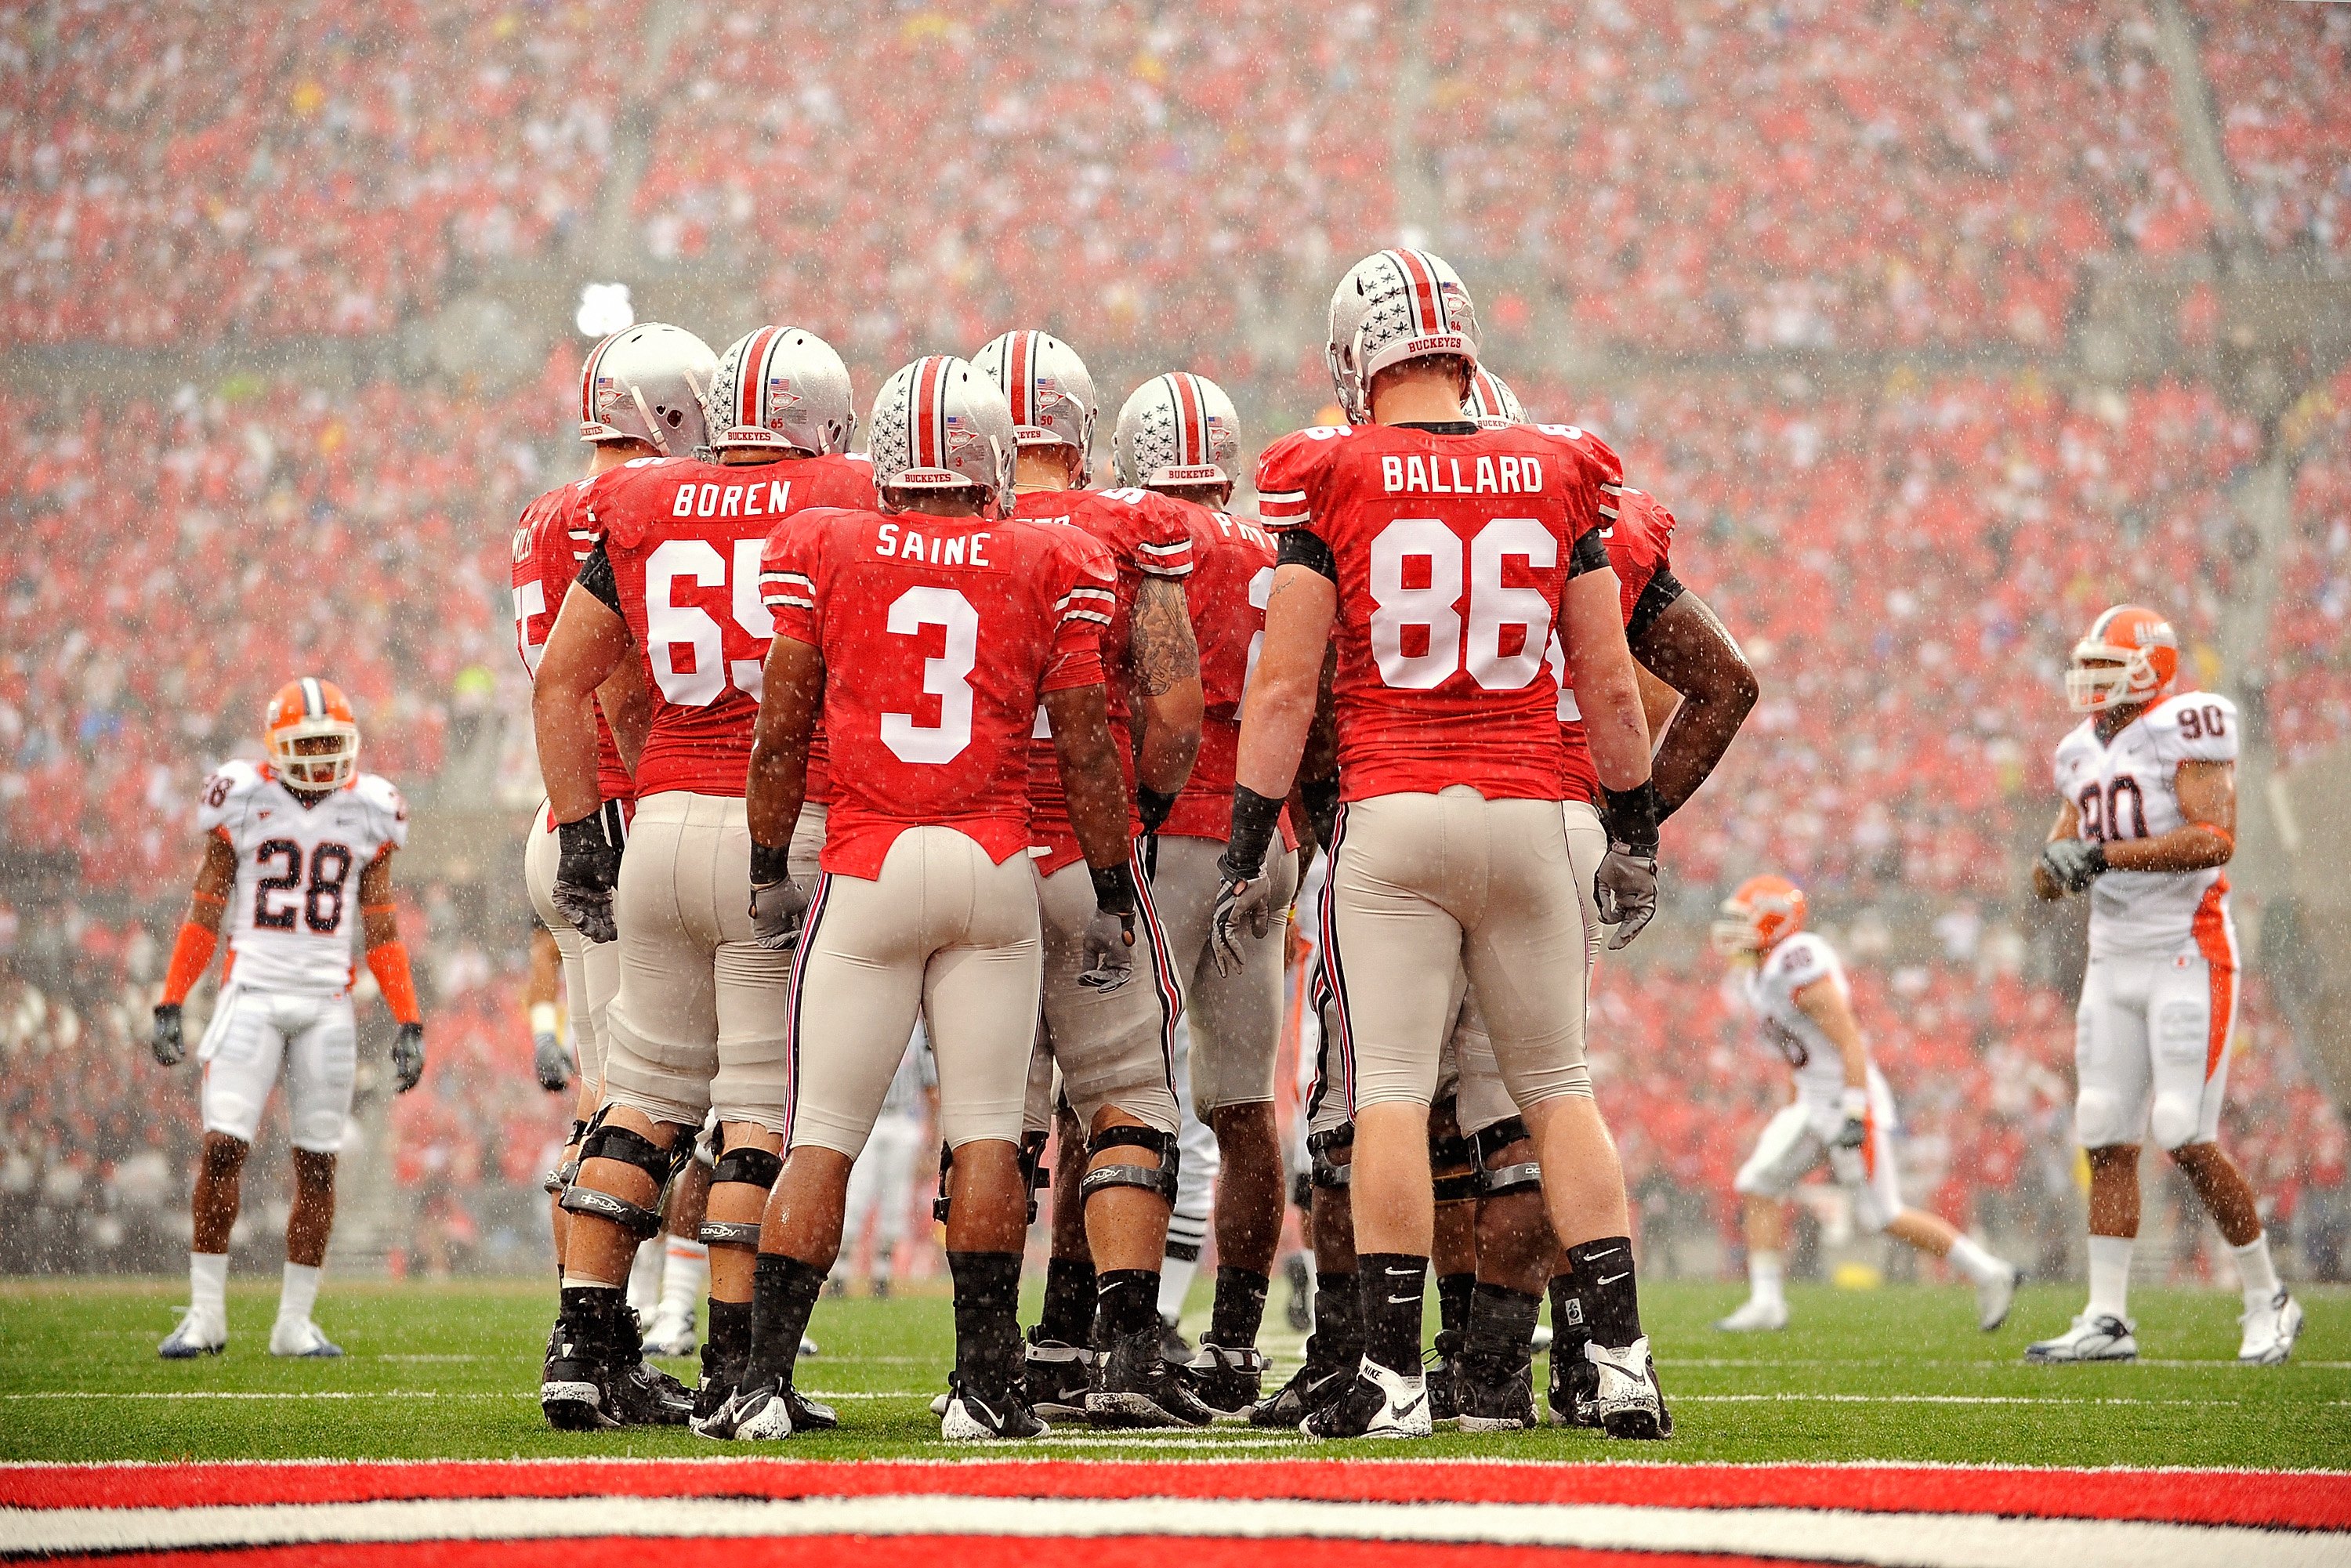 COLUMBUS, OH - SEPTEMBER 26:  The Ohio State Buckeyes offense huddles up before a play against the Illinois Fighting Illini at Ohio Stadium on September 26, 2009 in Columbus, Ohio.  (Photo by Jamie Sabau/Getty Images)